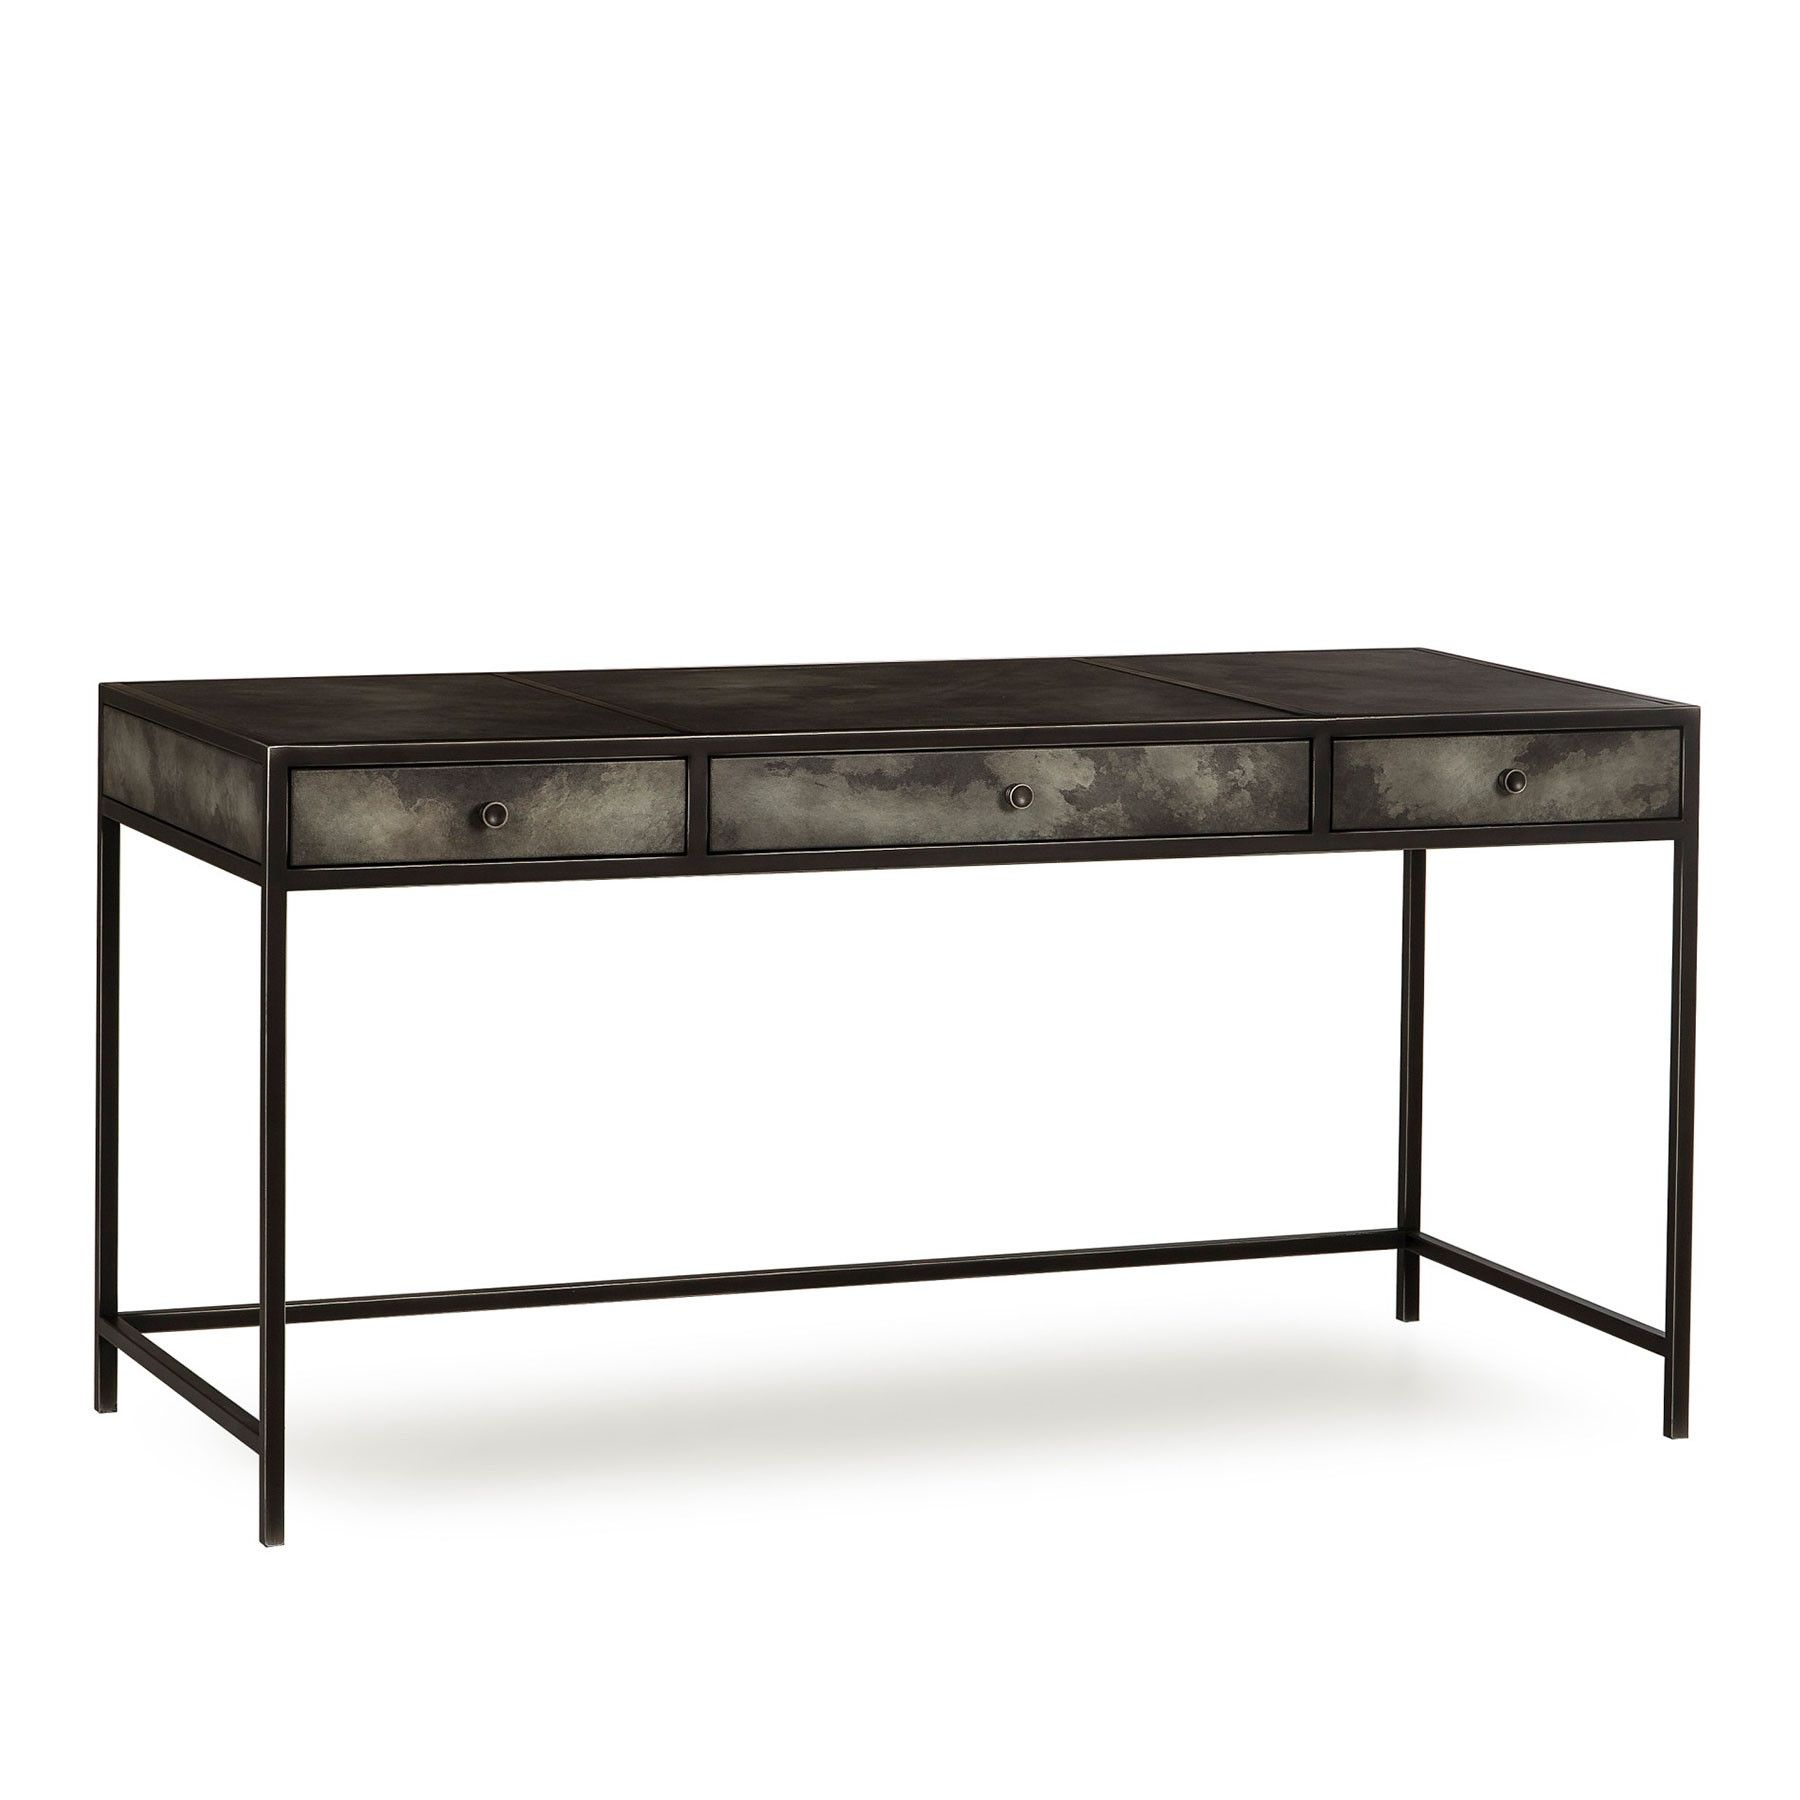 Resource Decor 0801180 Throughout Grey Shagreen Media Console Tables (View 11 of 20)